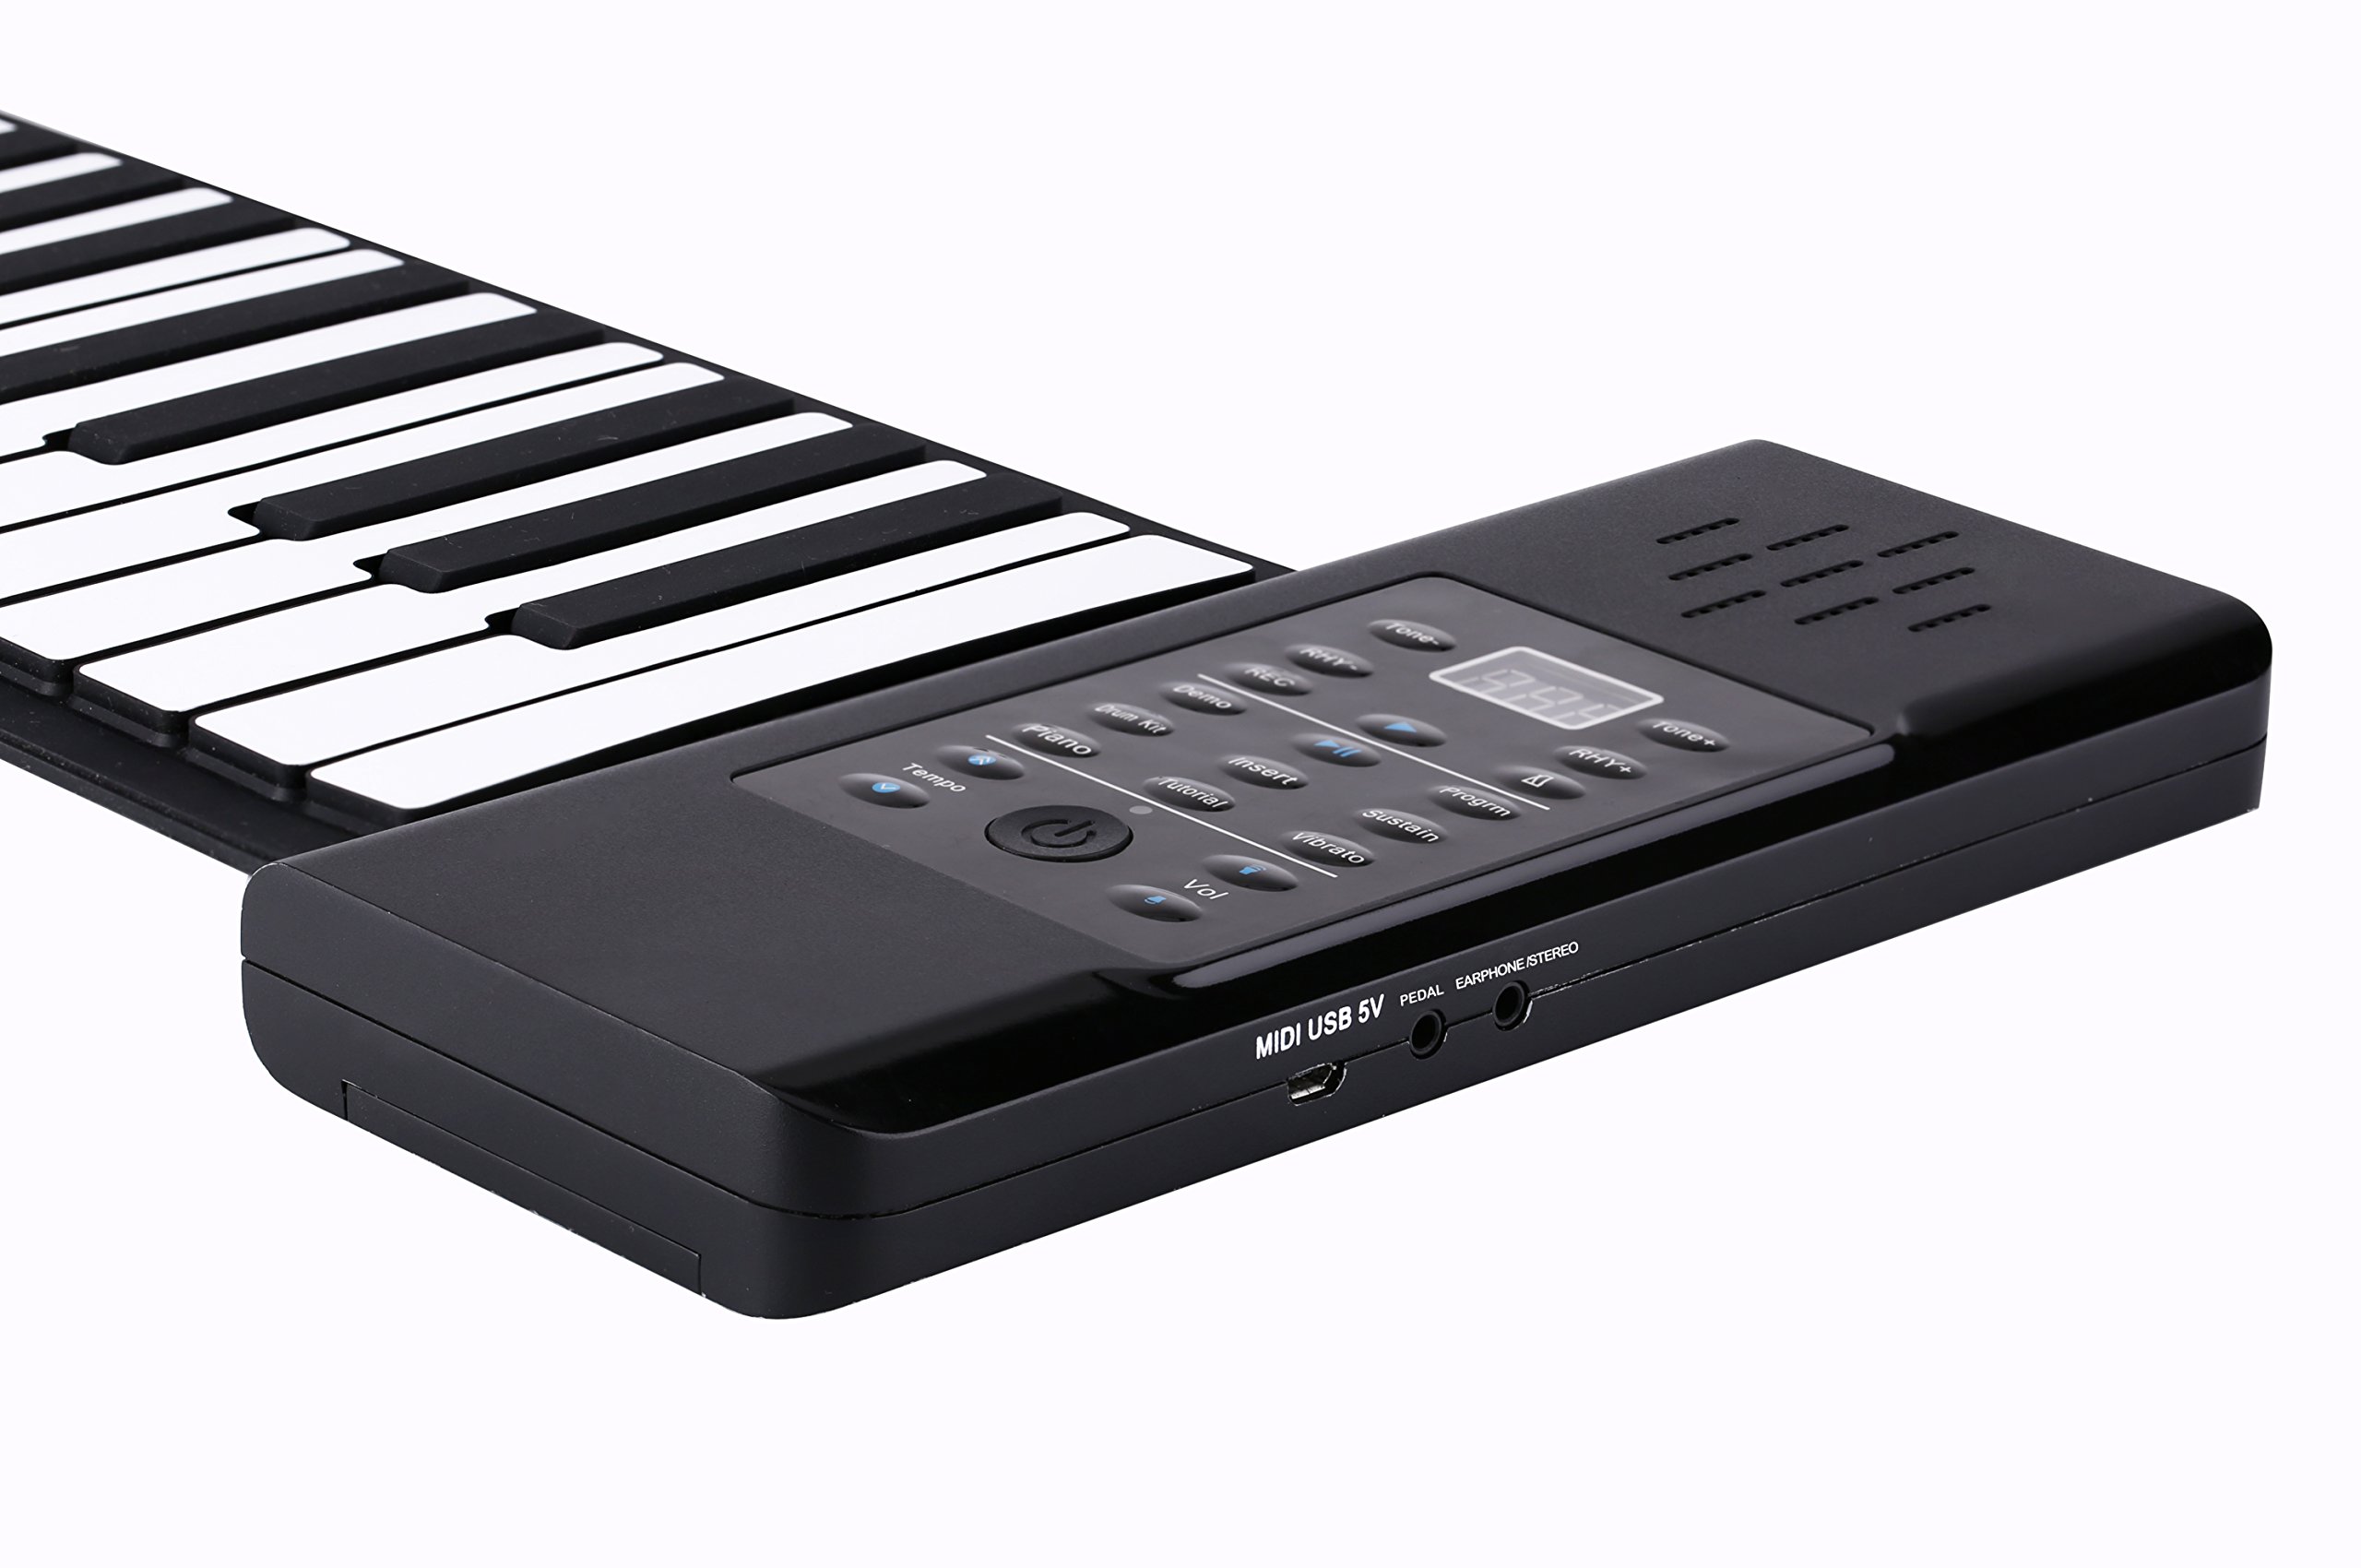 usb roll up piano for mac